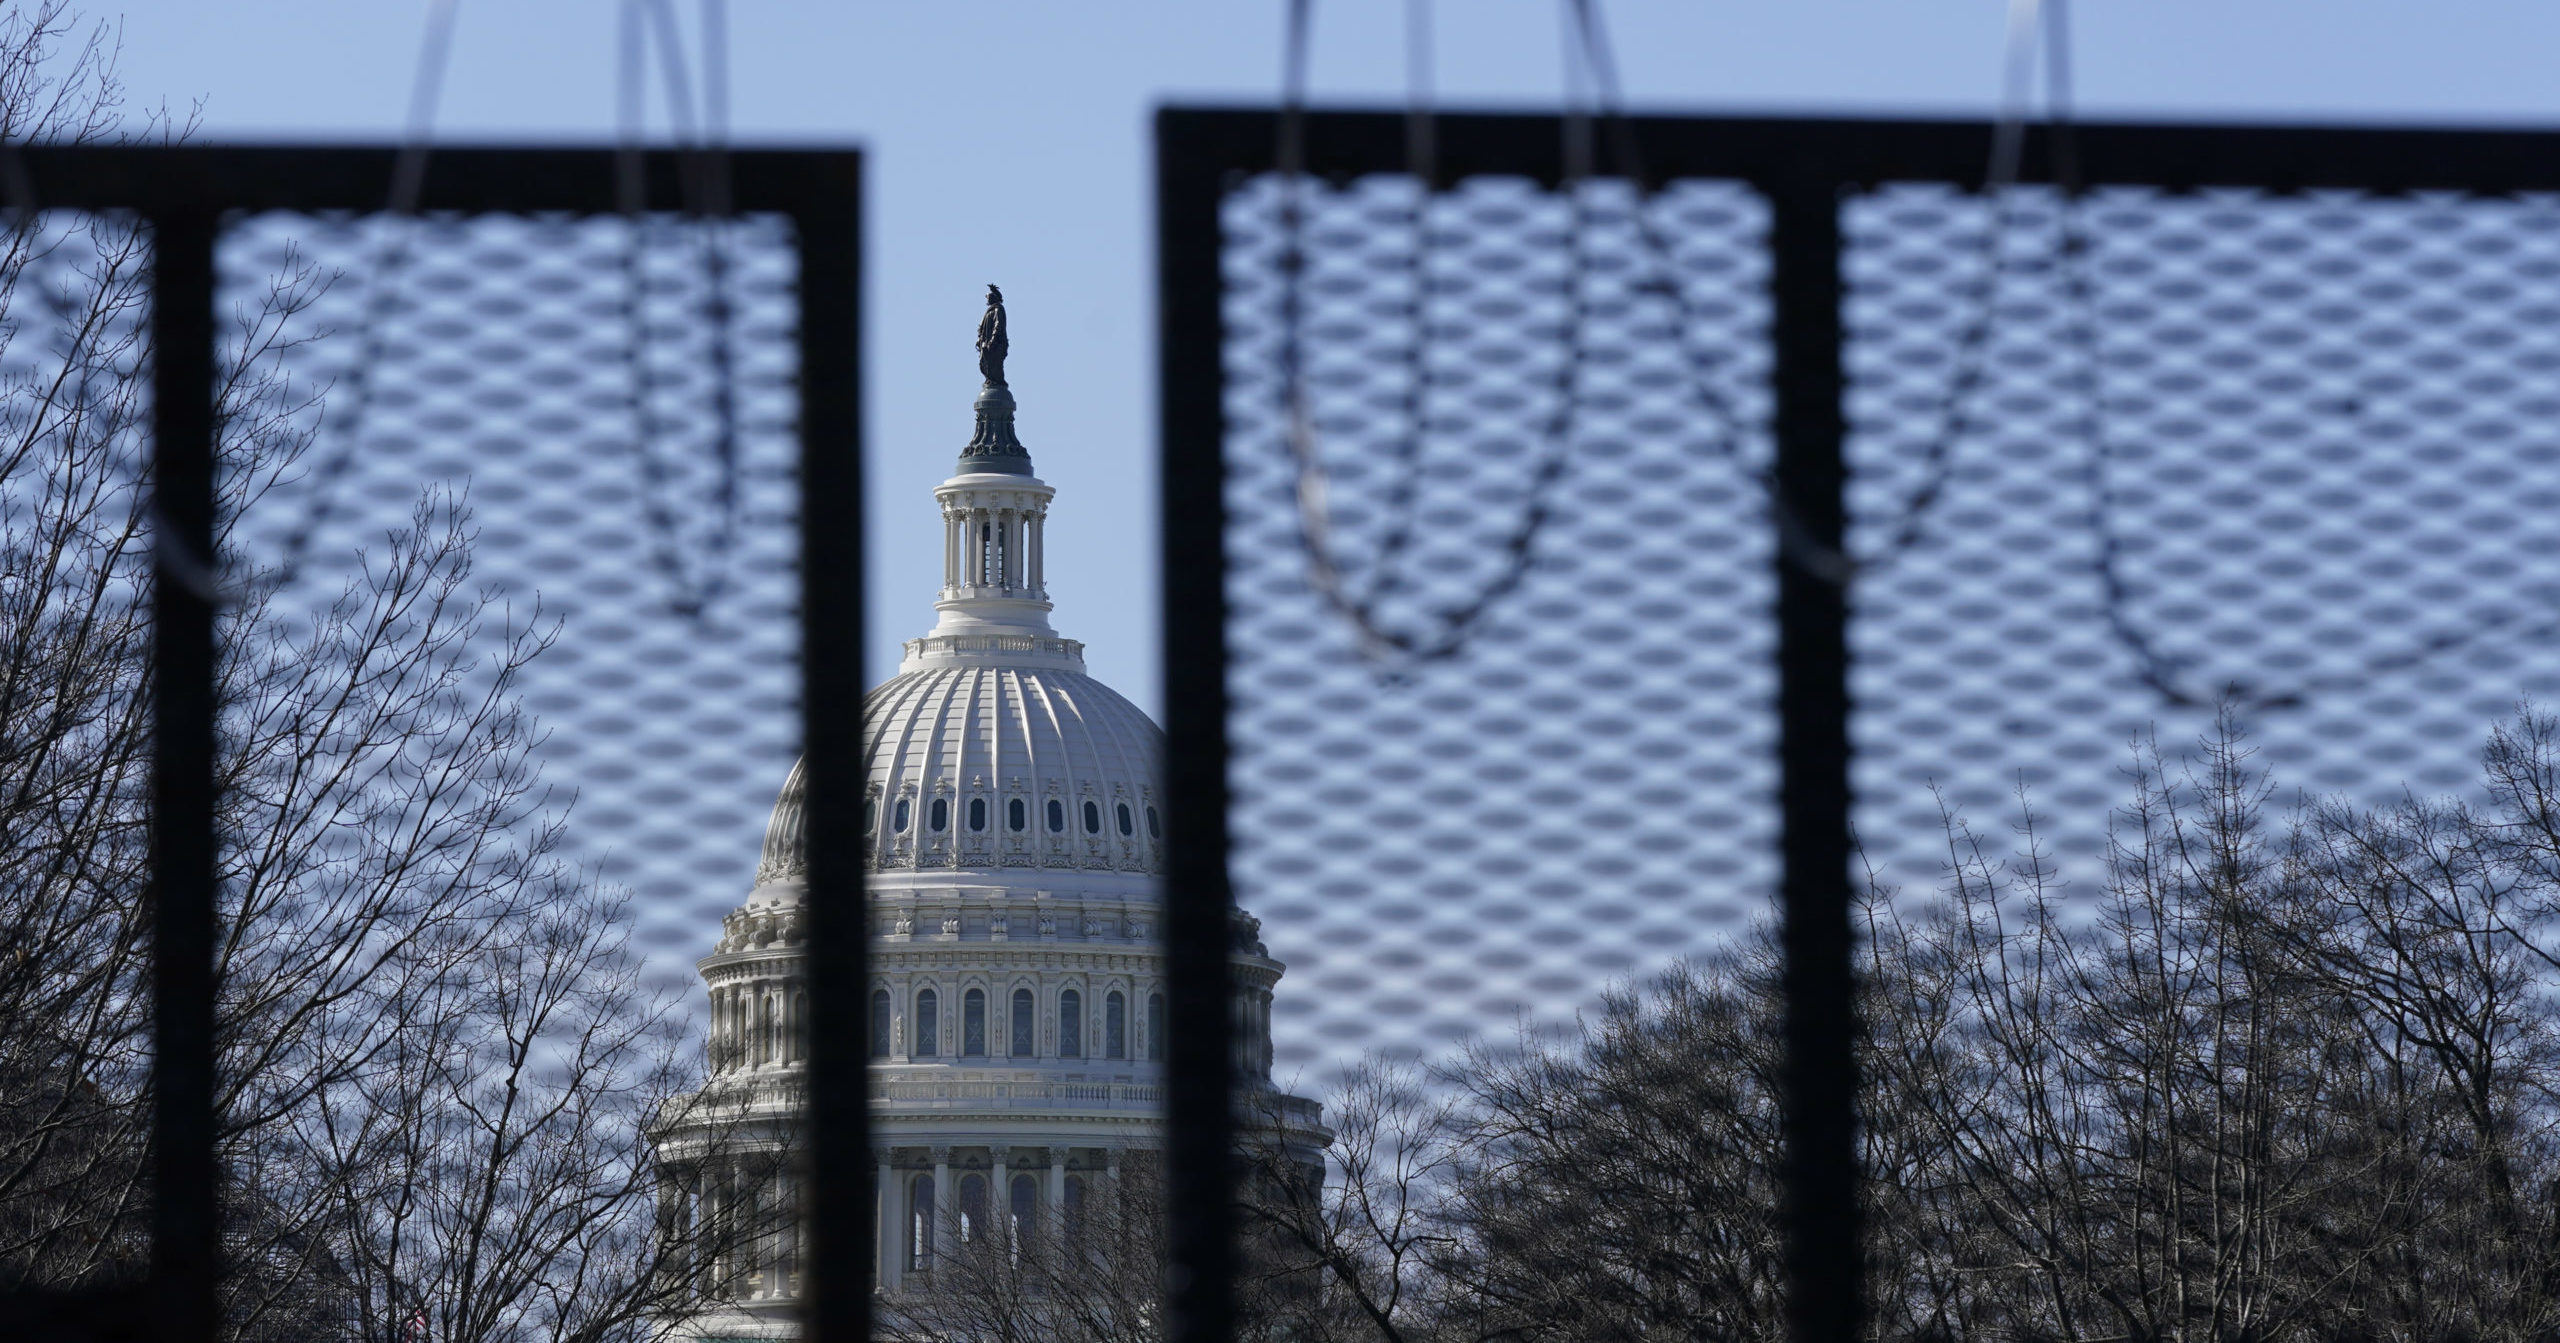 The US Capitol stands behind razor wire hanging from a security fence on Capitol Hill in Washington, D.C., on March 20, 2021.